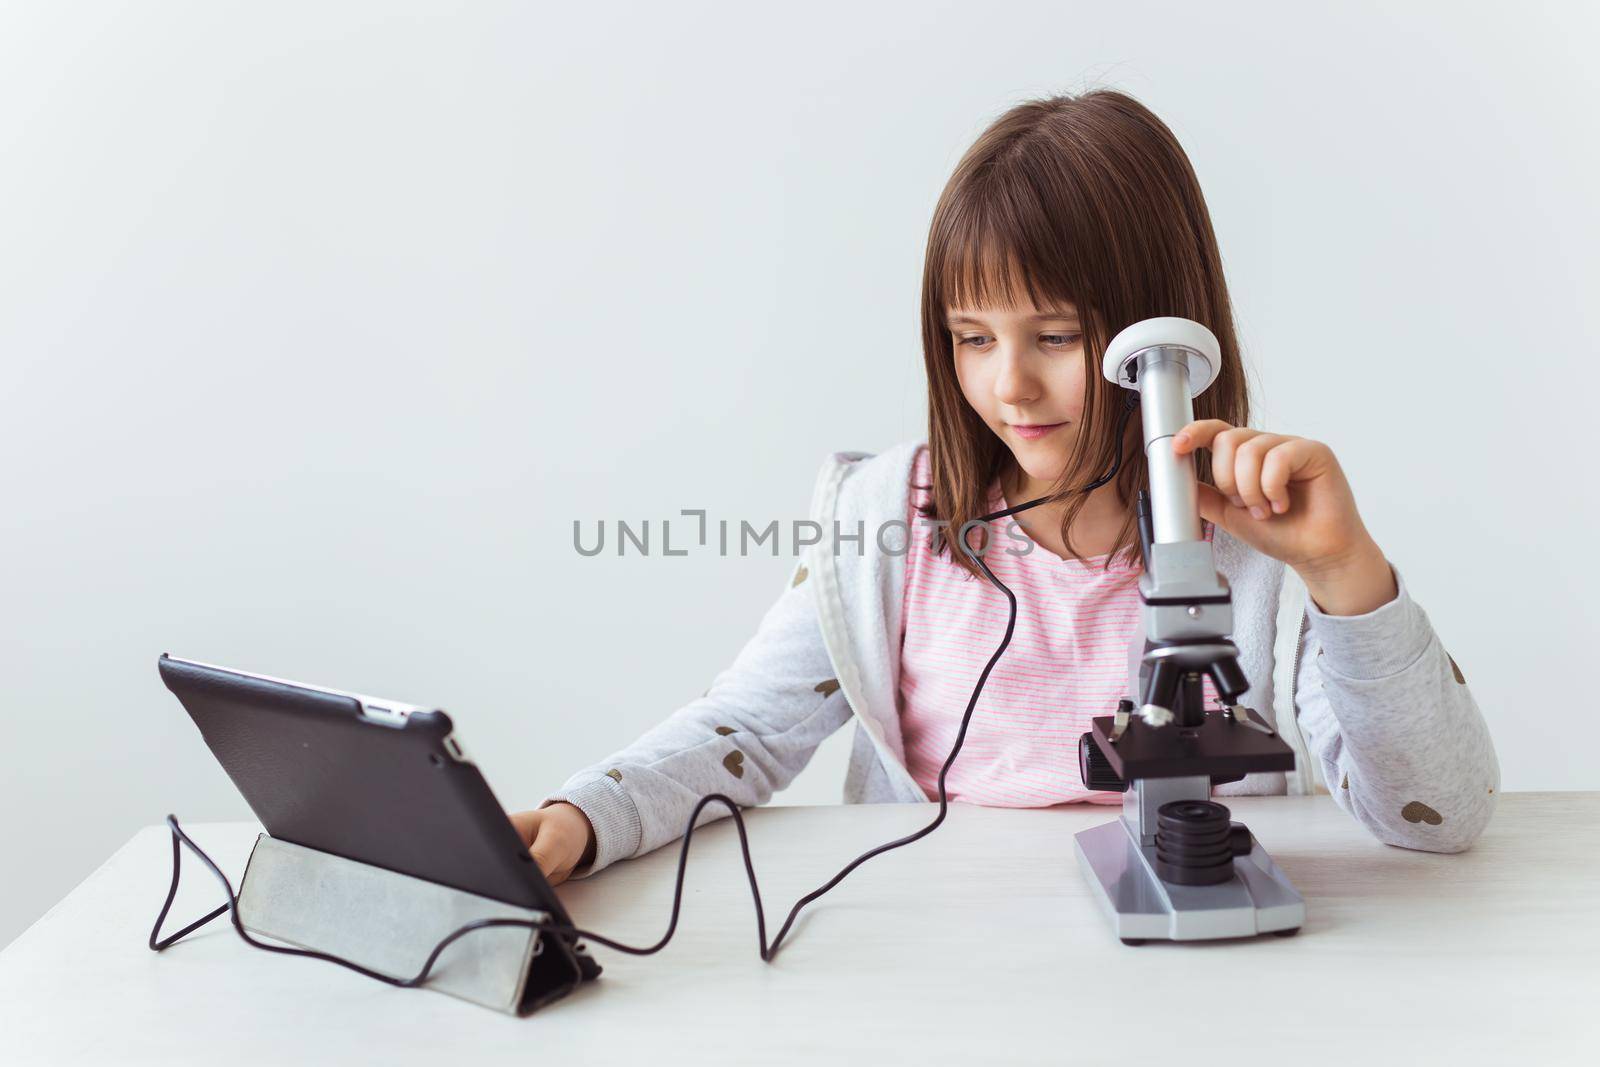 Portrait of cute little child doing homework with a digital microscope. Technologies, science and children concept. by Satura86